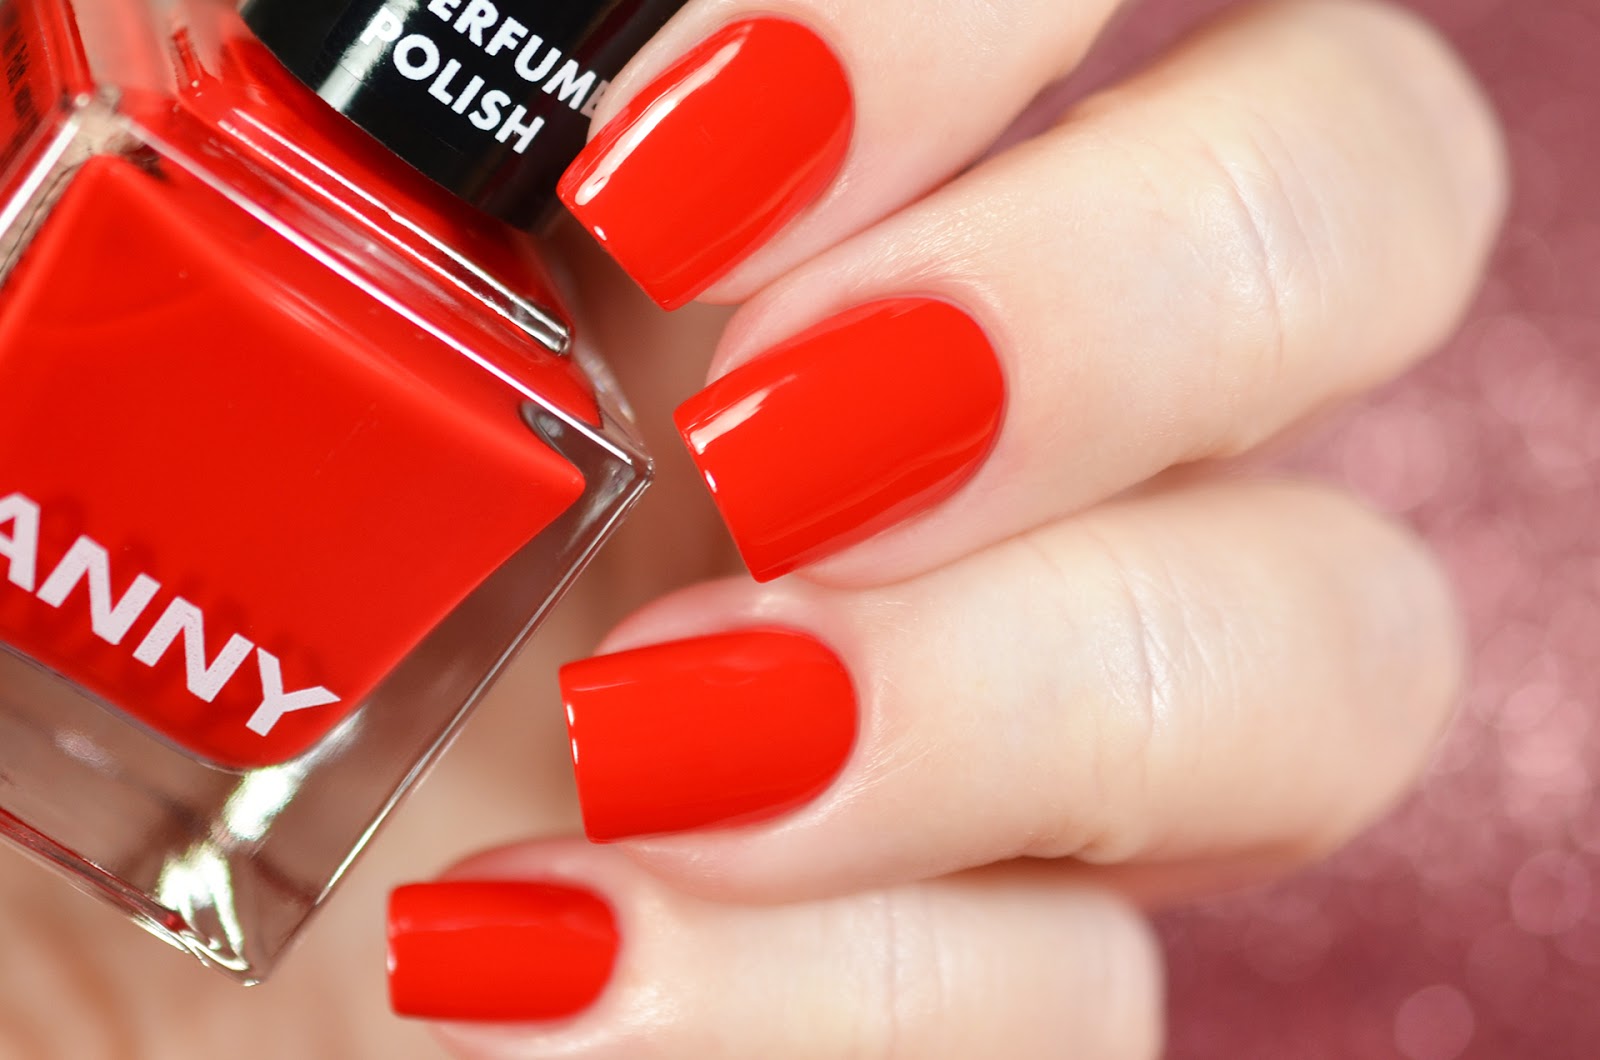 Anny купить. Лак Anny 85. Anny 85 only Red. Anny Perfume Polish collection. Anny 915.